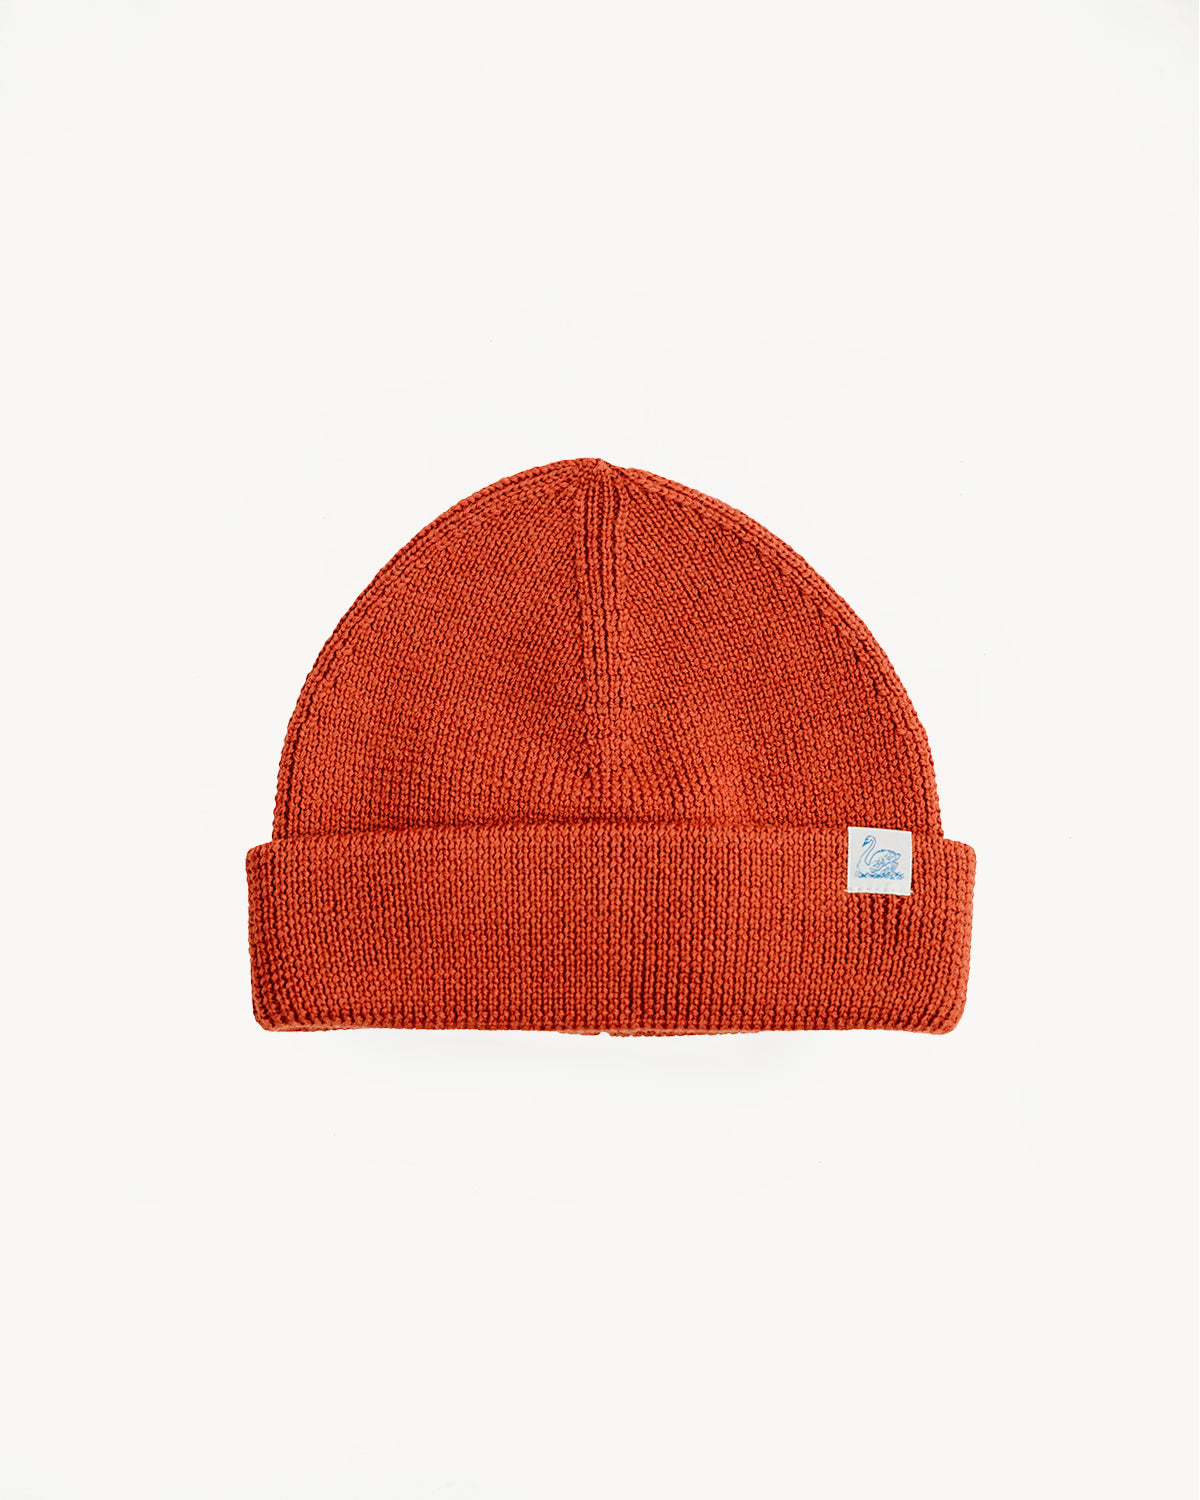 MWBN05.307 - Ribbed Structure Watch Cap Merino Wool - Clay | James Dant